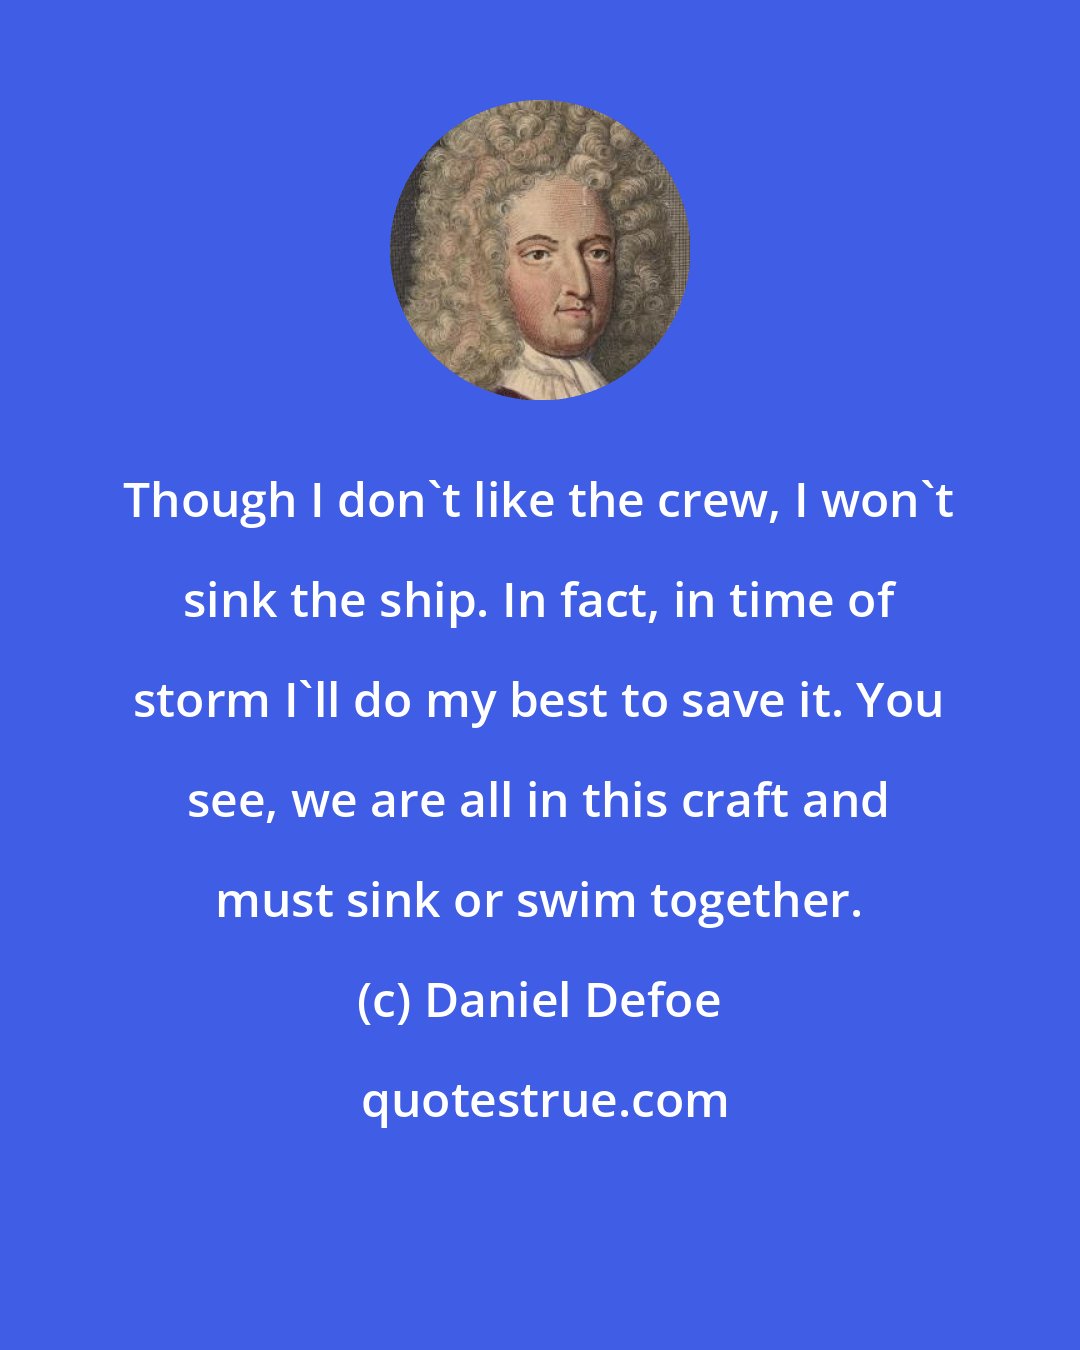 Daniel Defoe: Though I don't like the crew, I won't sink the ship. In fact, in time of storm I'll do my best to save it. You see, we are all in this craft and must sink or swim together.